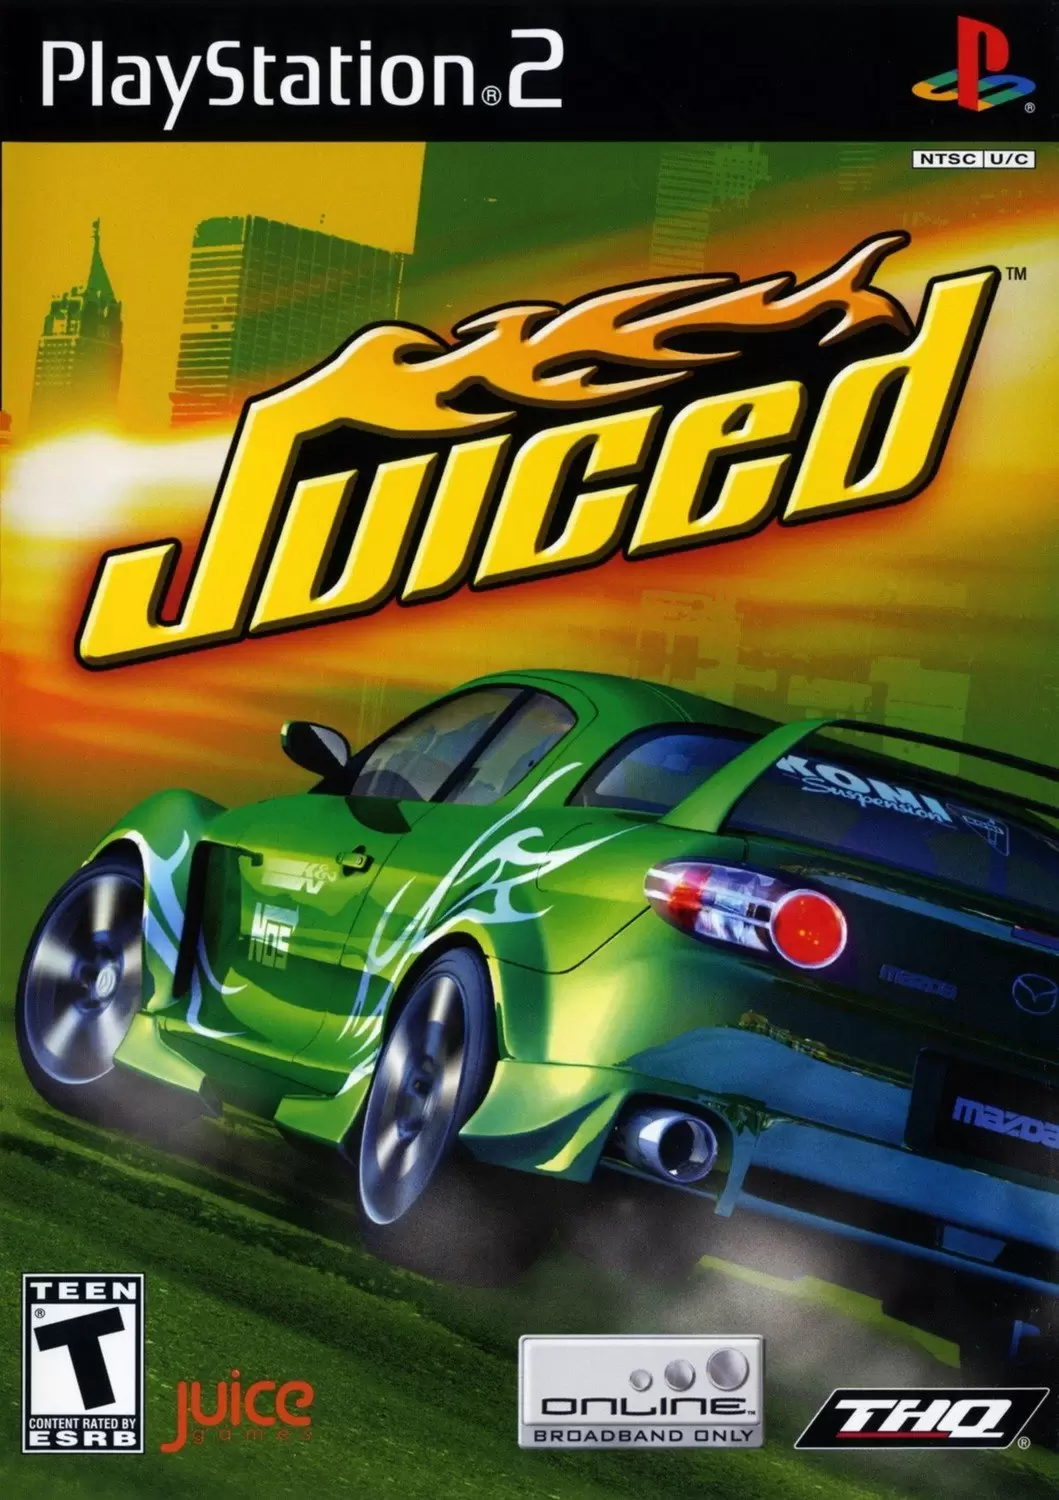 PS2 Games - Juiced